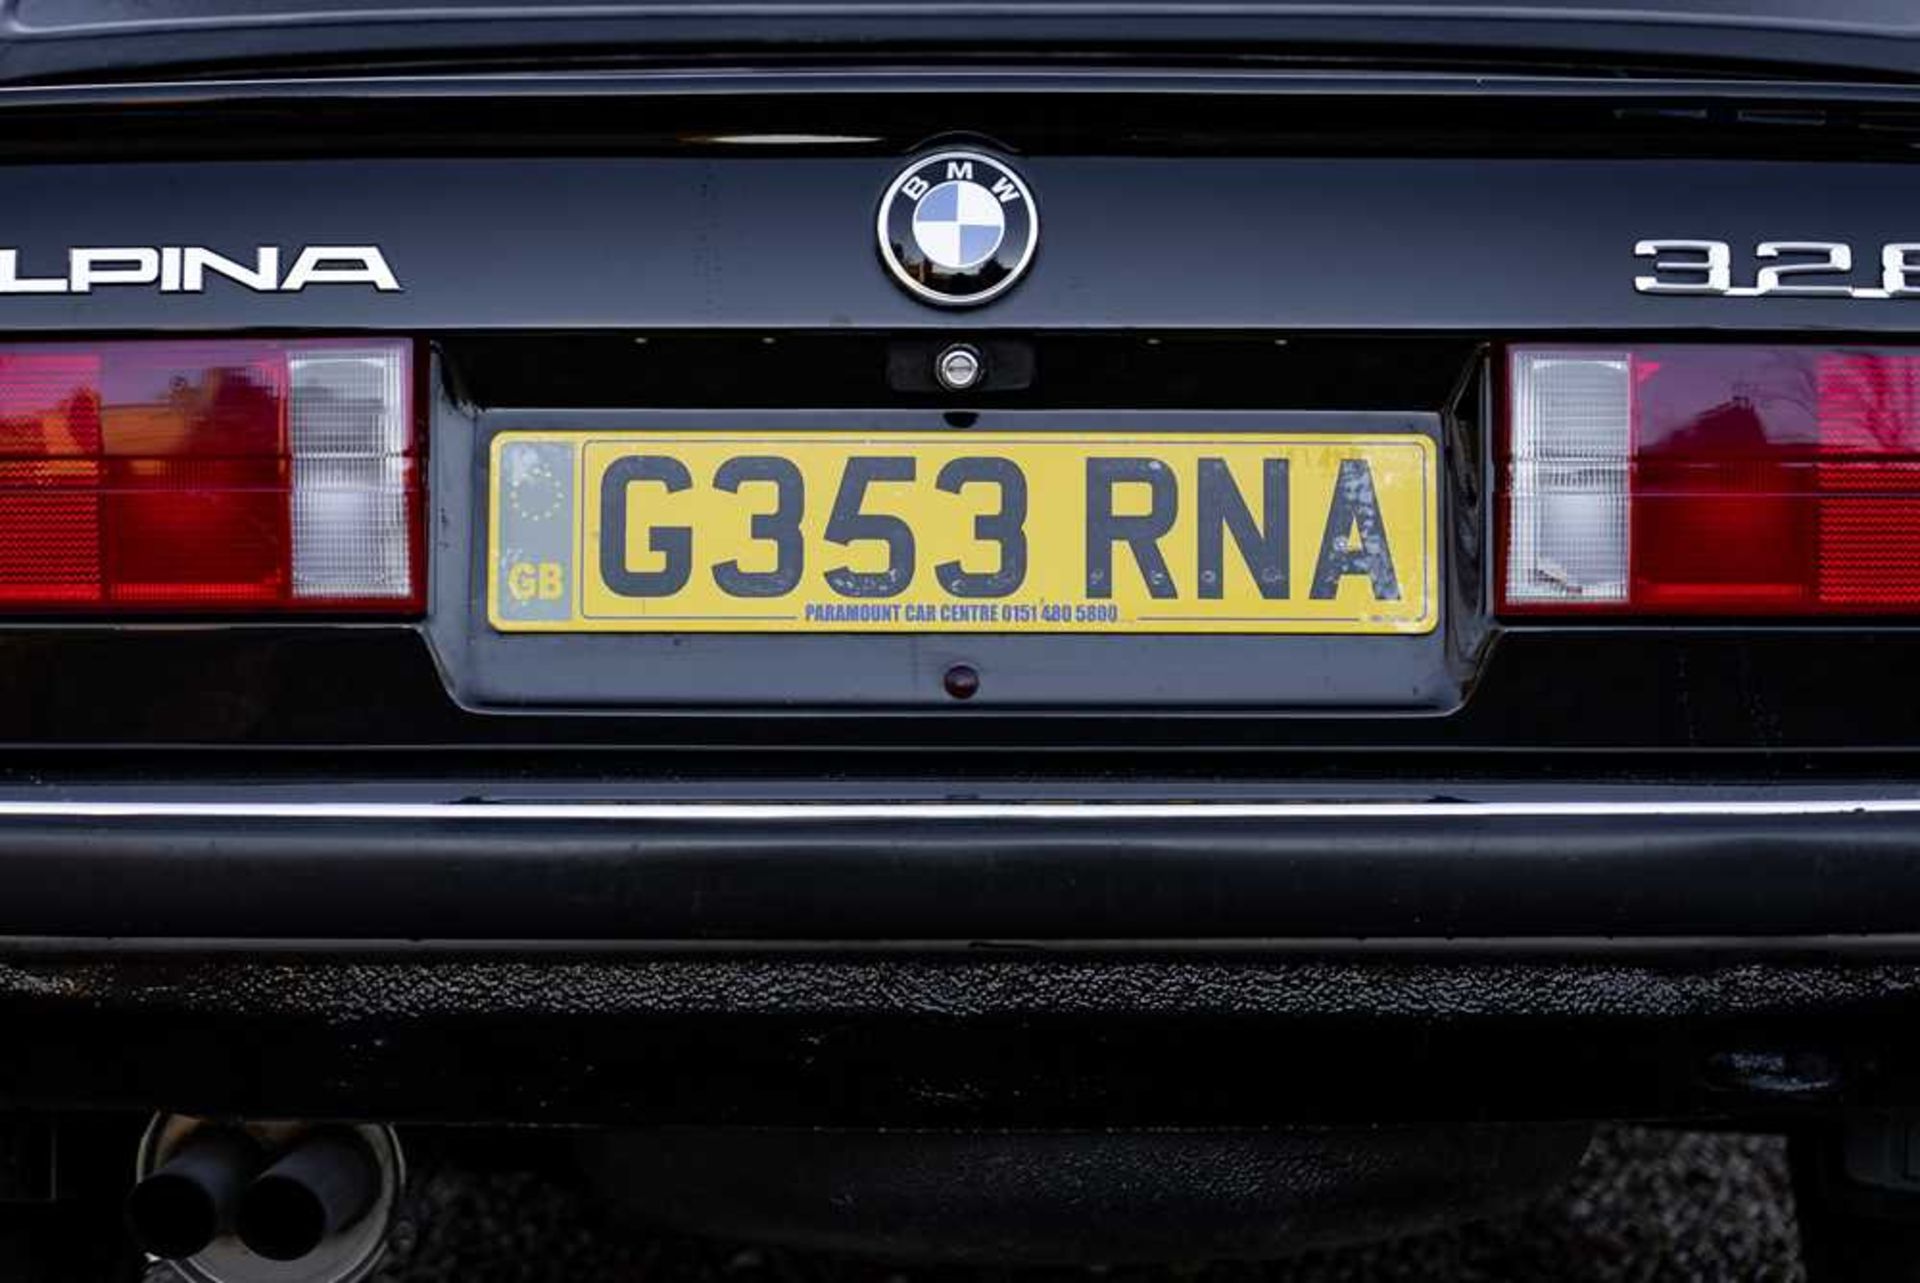 1989 BMW 320i Convertible Converted to Alpina 328i Specification - Image 27 of 51